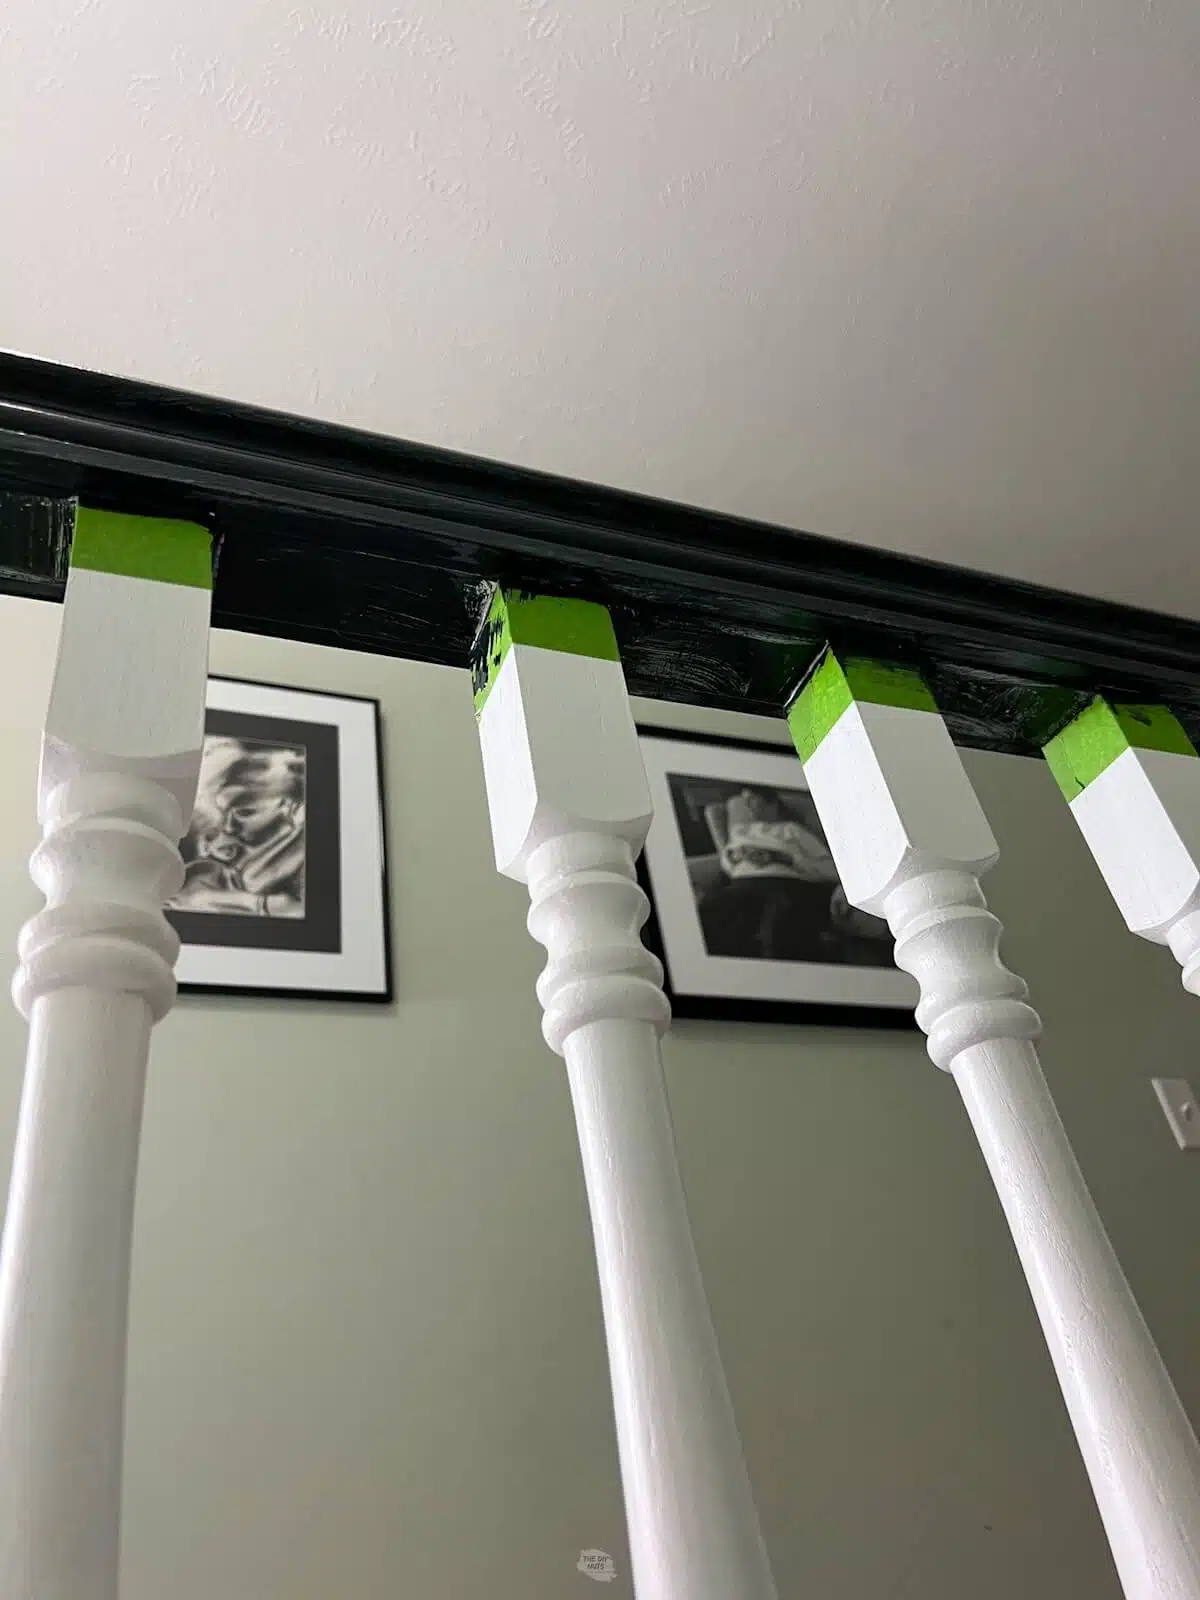 black painted handrail with white spindles and green tape.